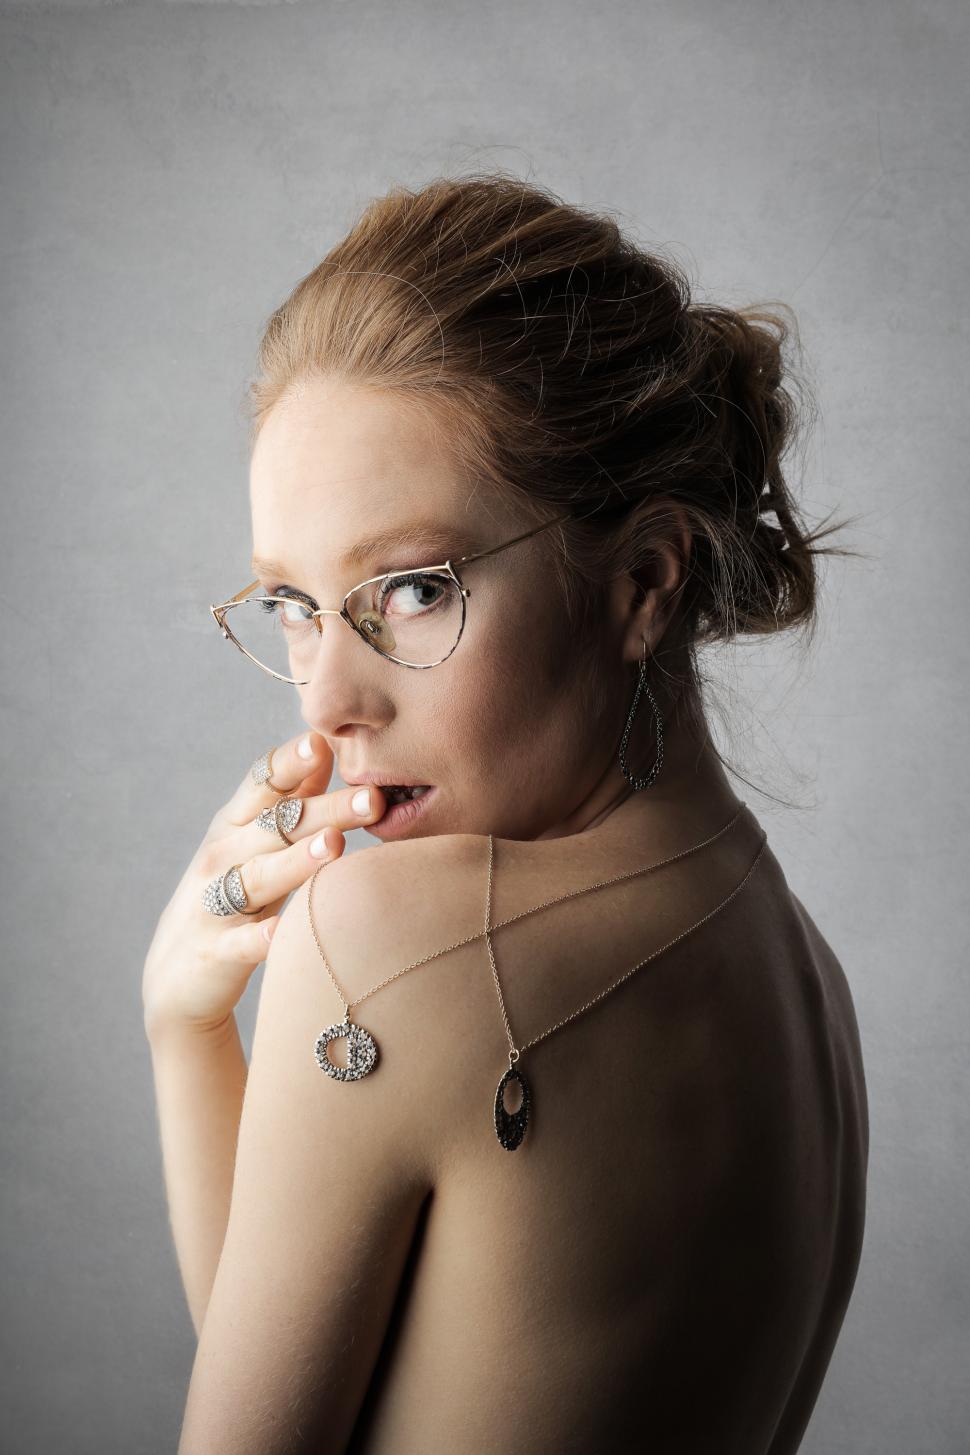 Free Image of A young blonde woman wearing jewelry looks over her shoulder 